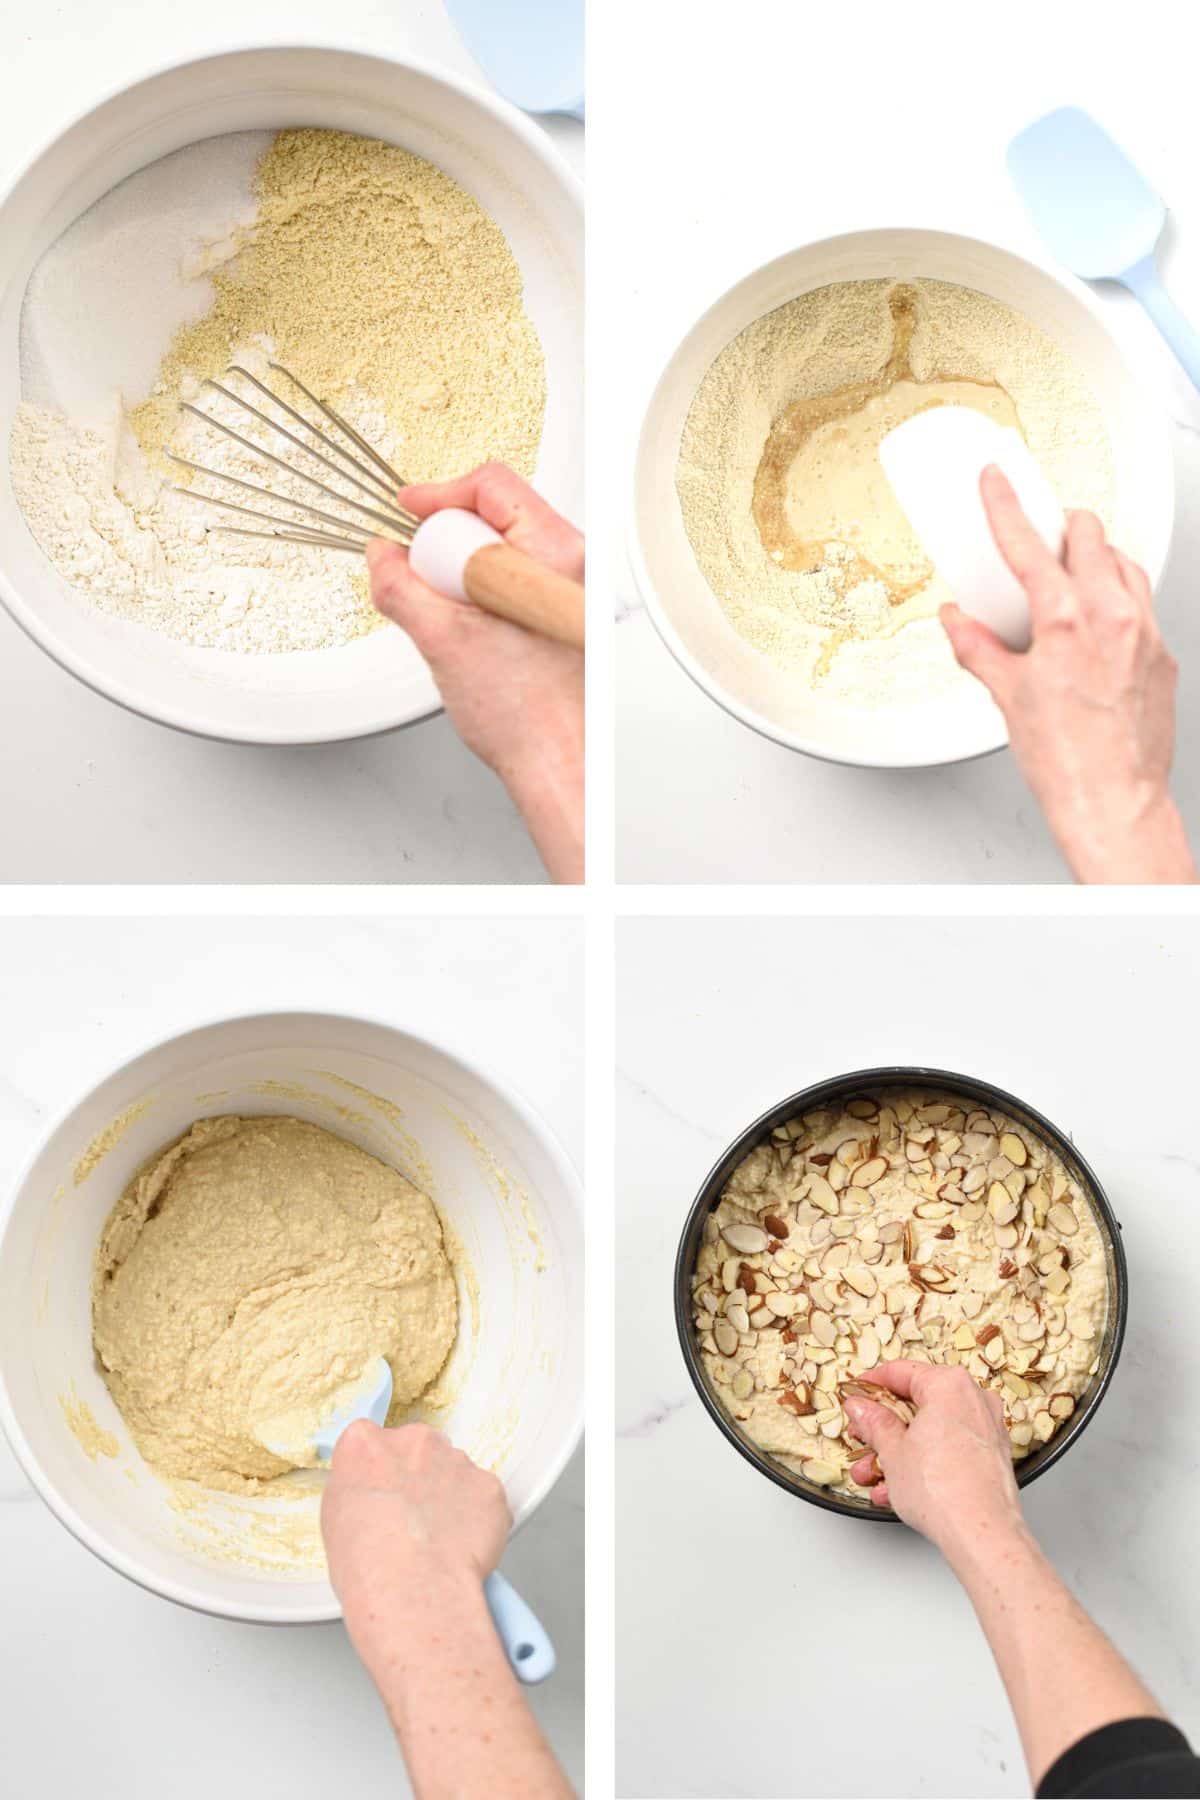 How to make almond flour cake with eggs